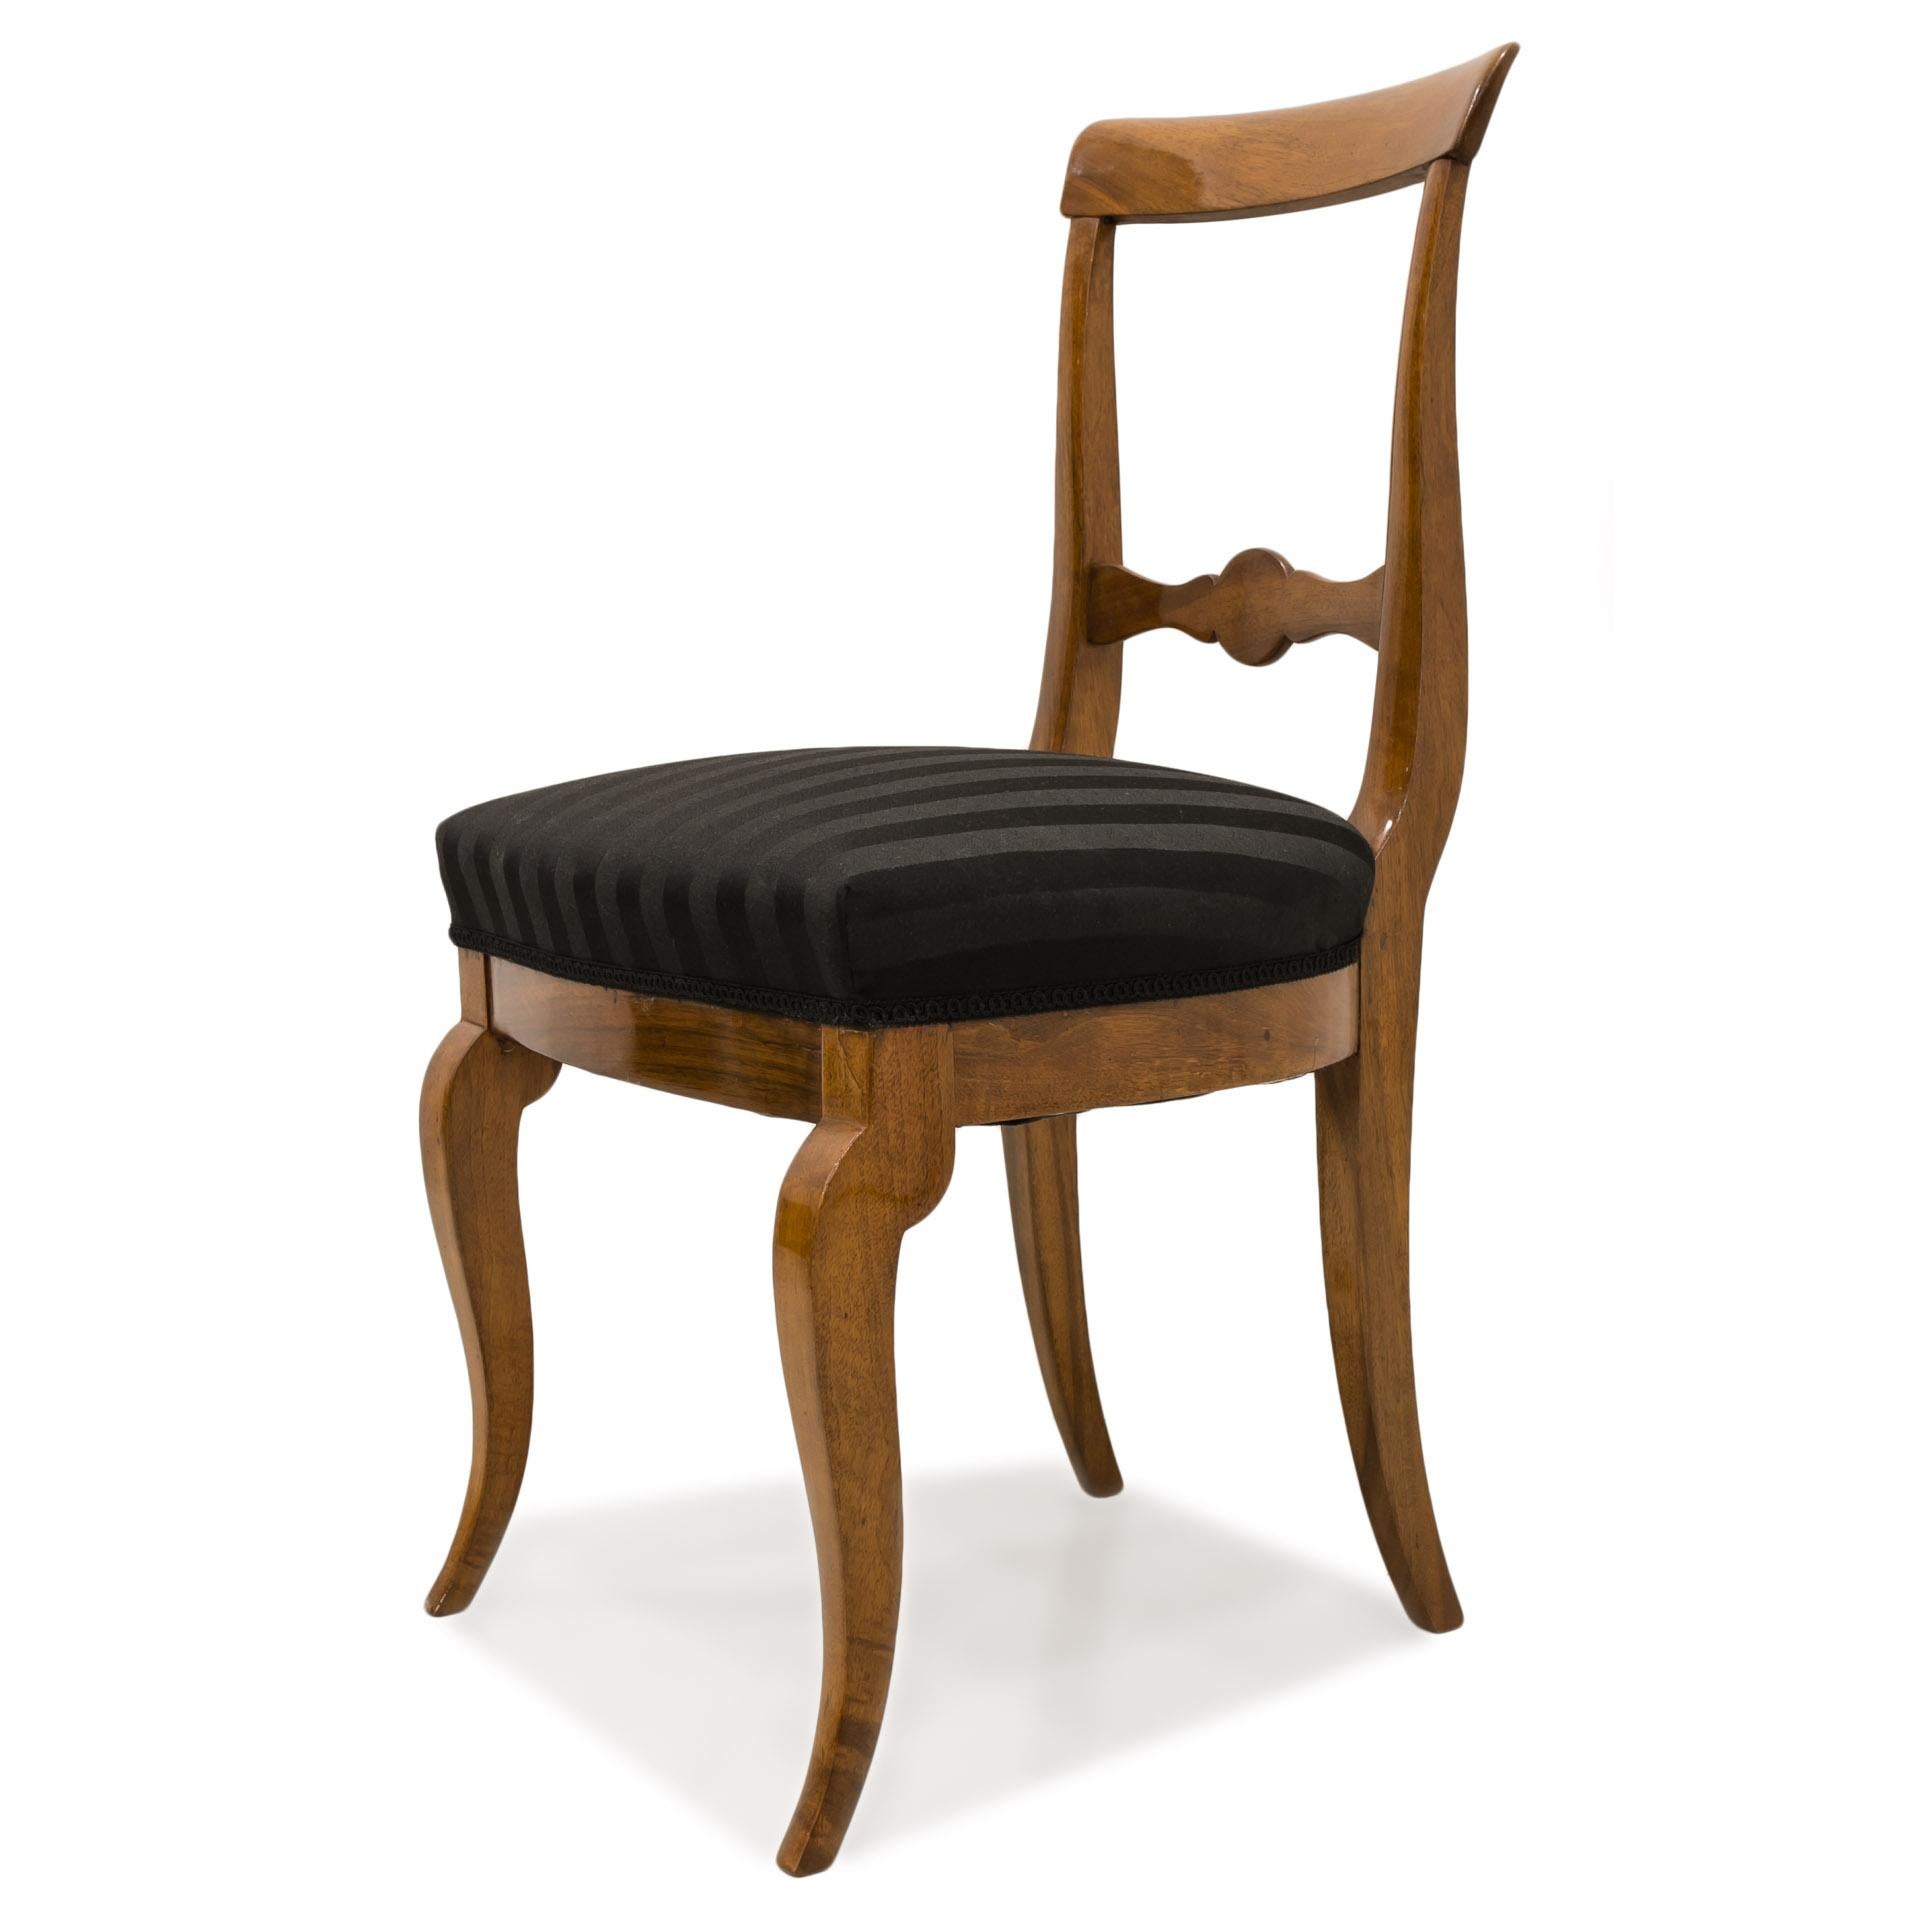 This set of three chairs comes from Germany from the Biedermeier period - years around 1820-1840. The chairs are made of walnut, the seat and backrest are veneered with walnut as well. The set is after complete renovation, reinished with shellac